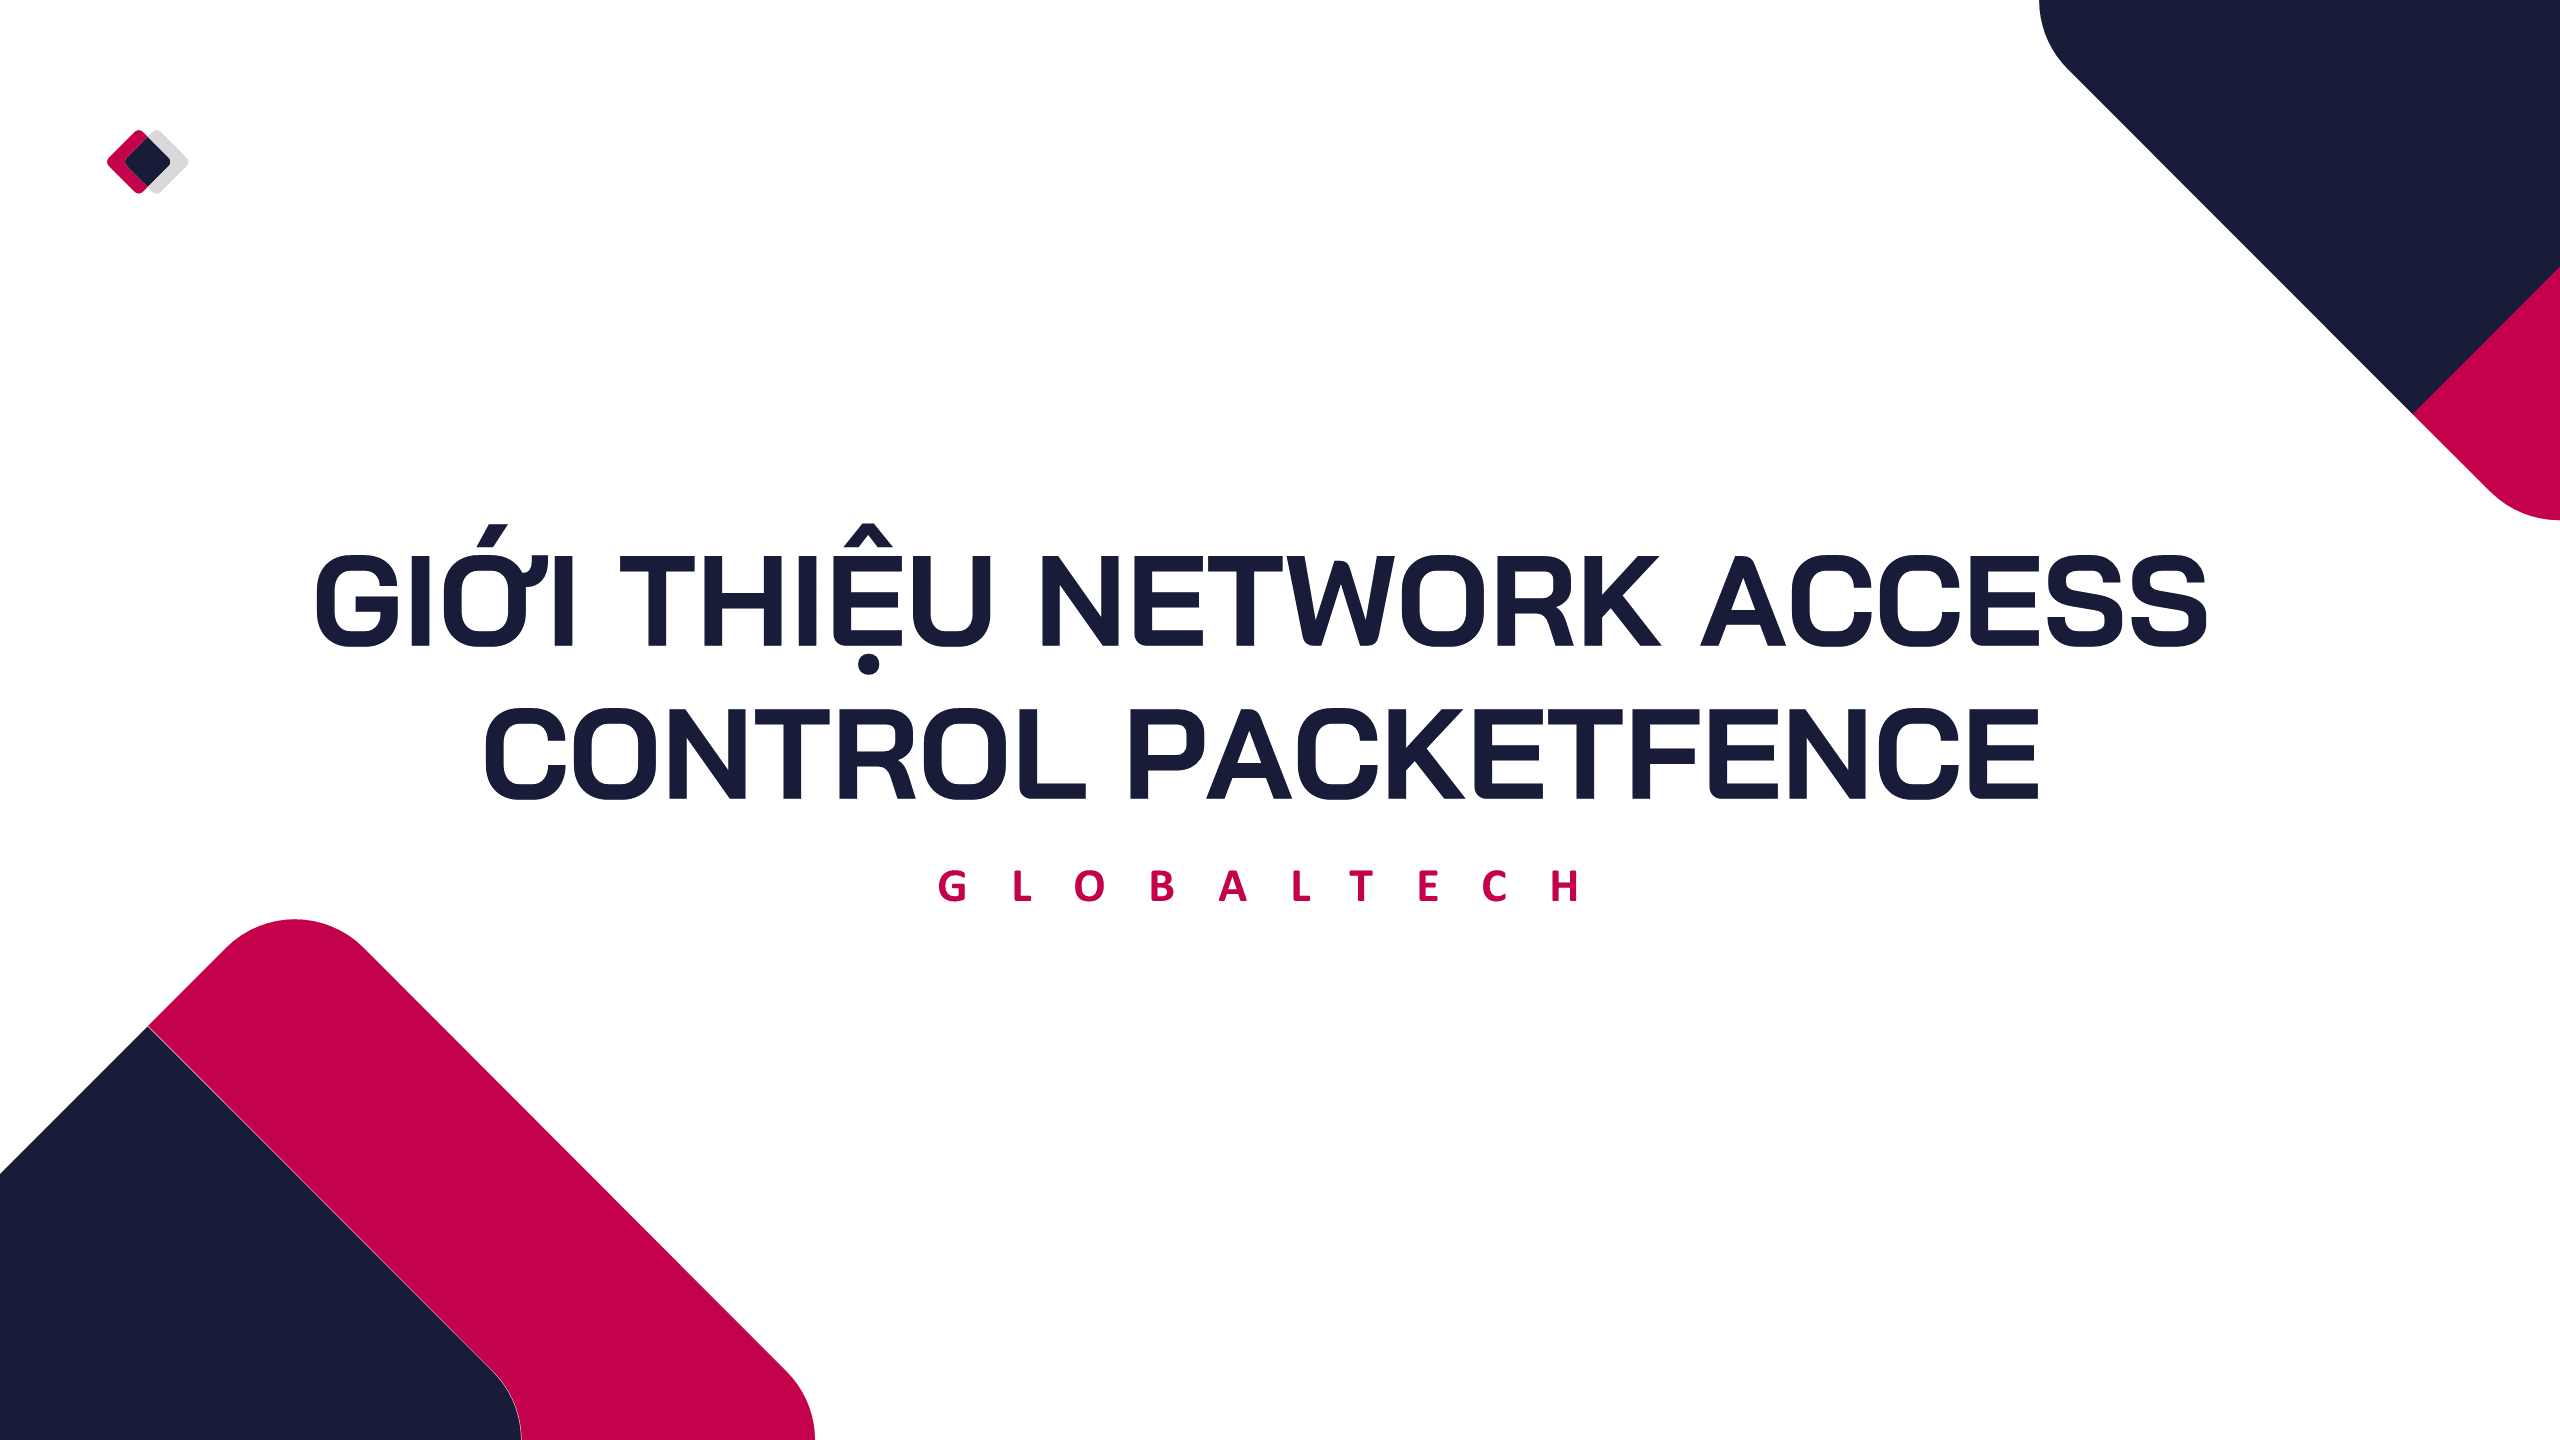 GIỚI THIỆU NETWORK ACCESS CONTROL PACKETFENCE